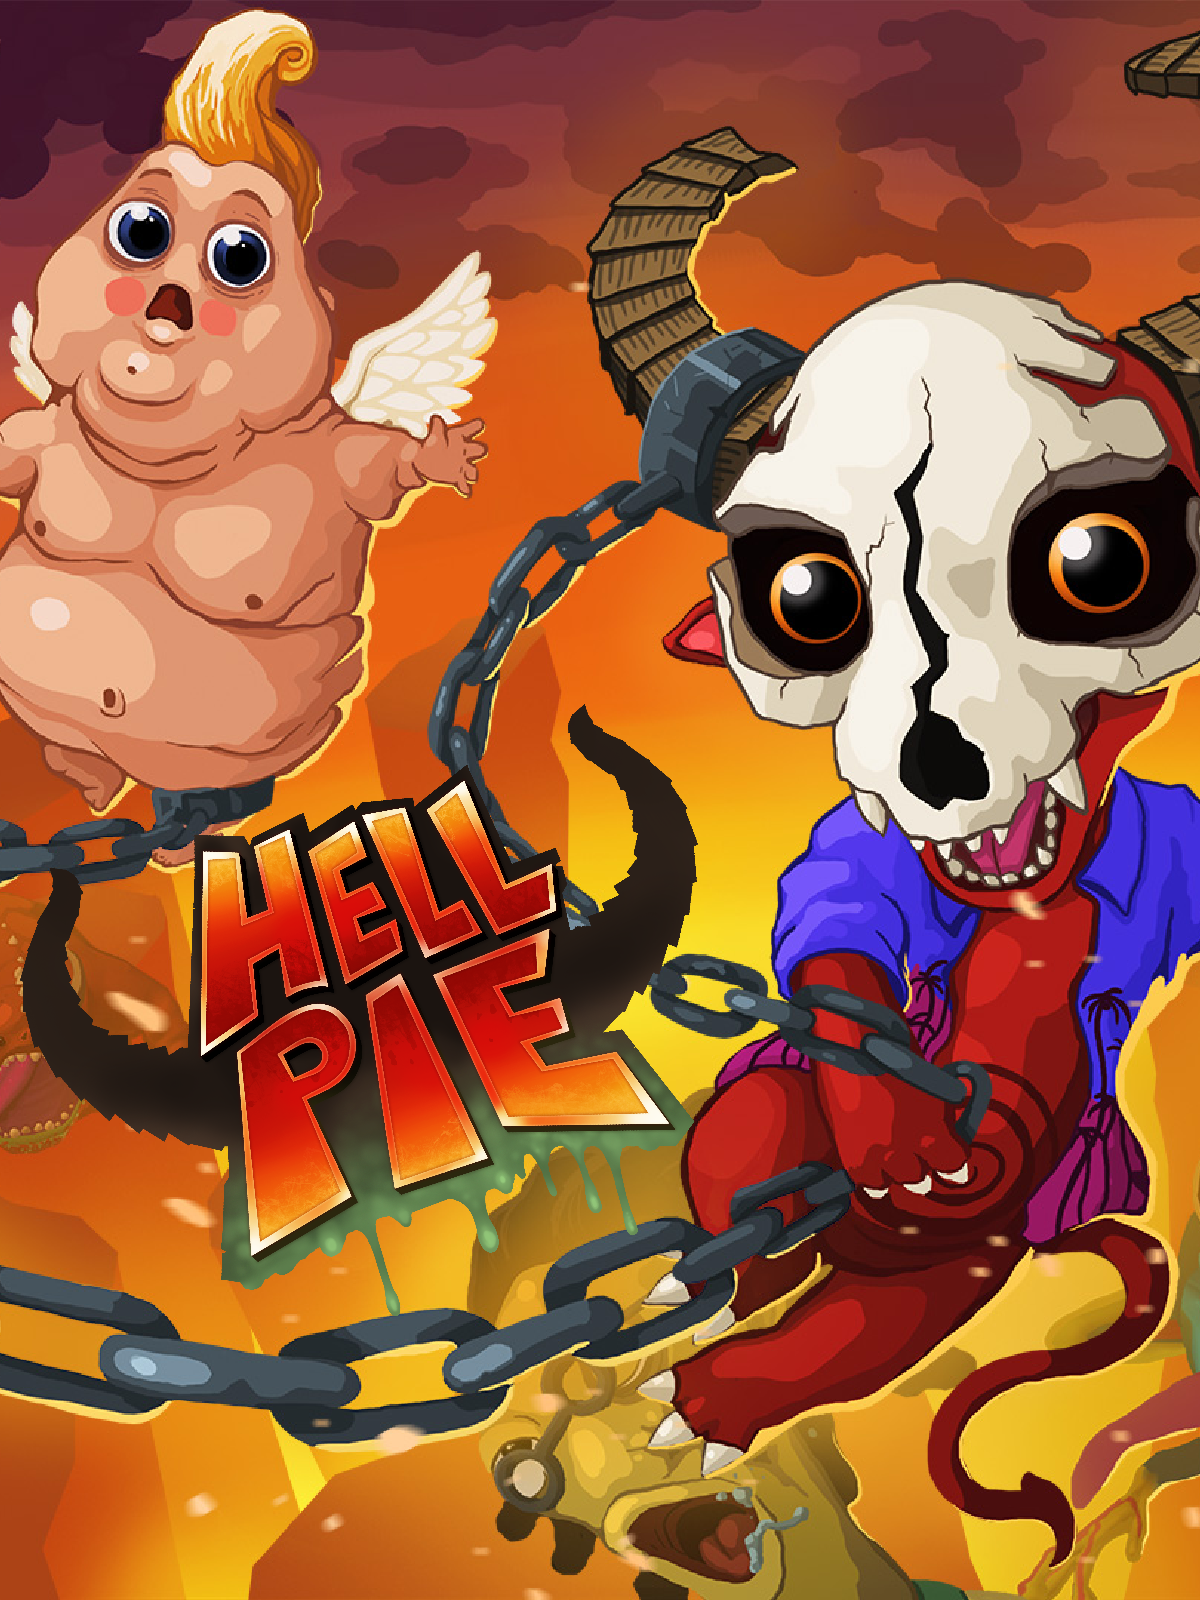 Hell Pie Cover